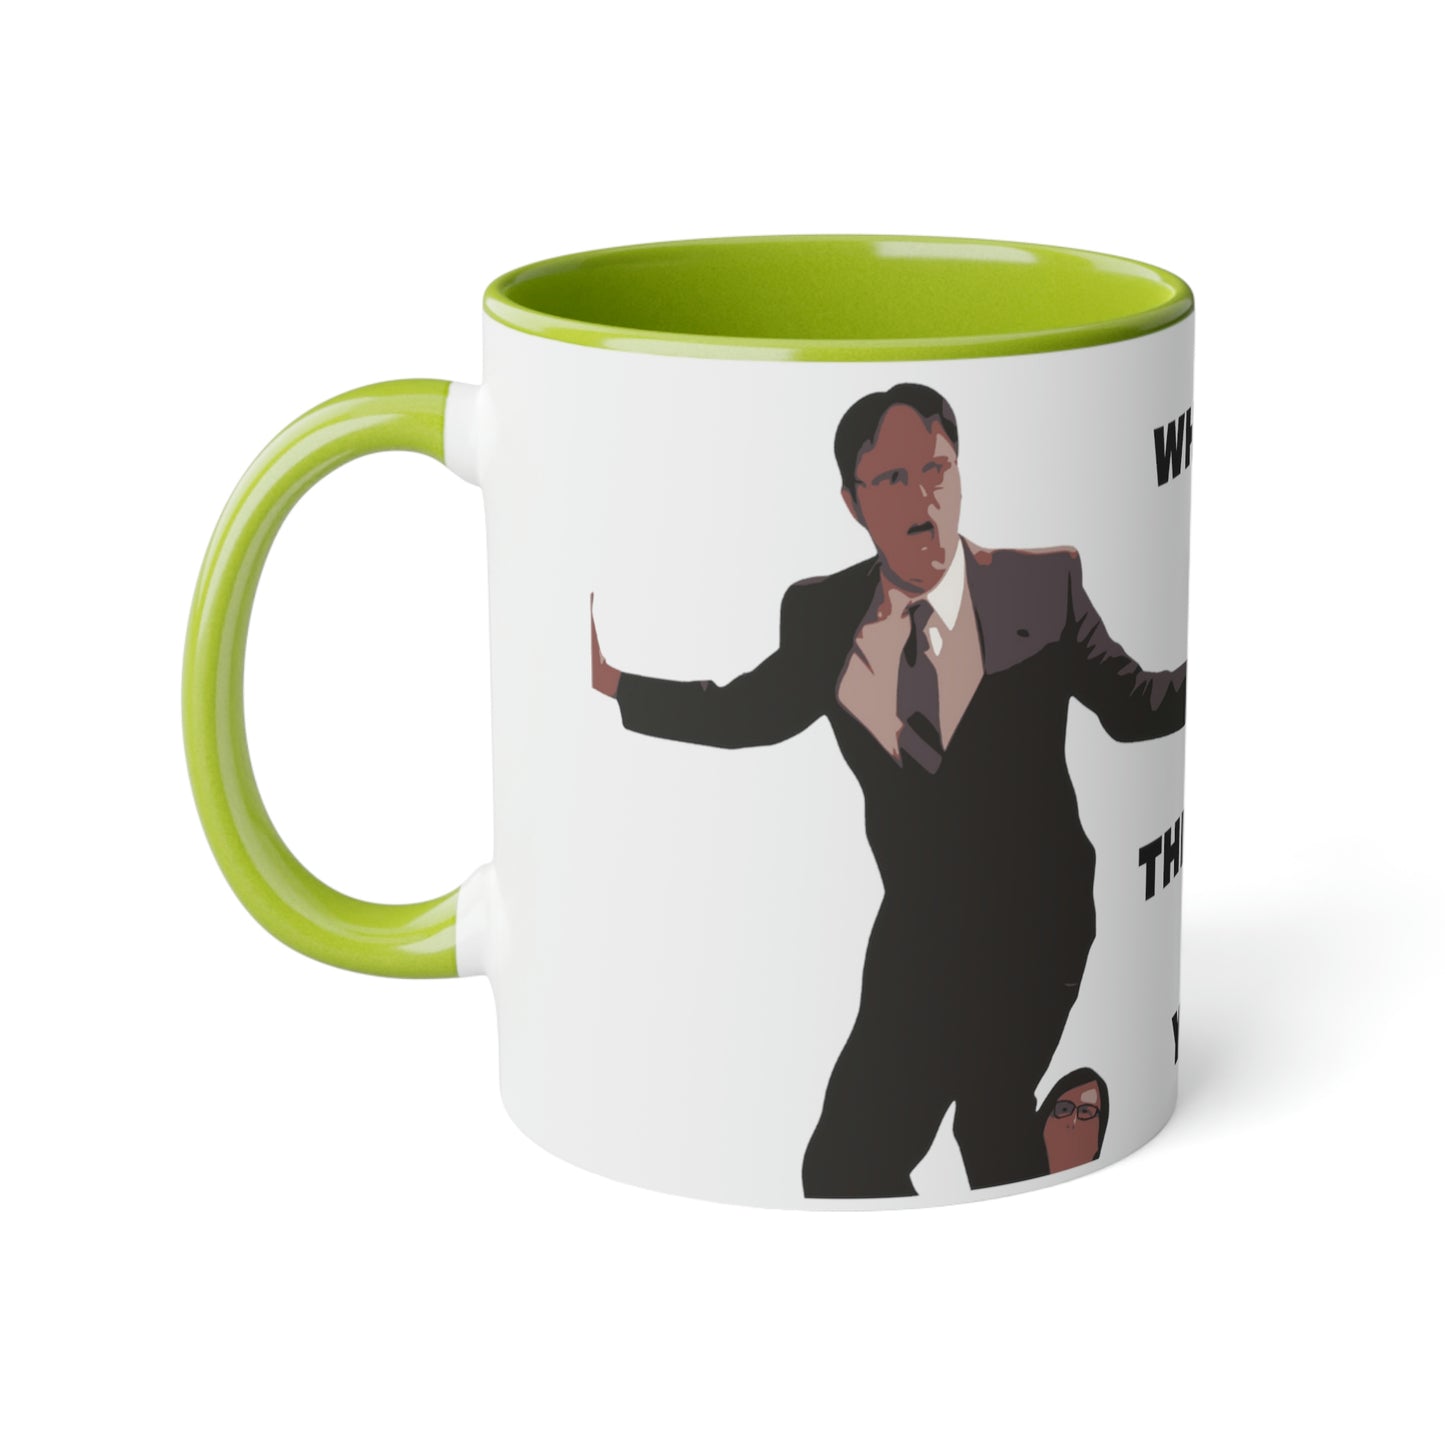 Meme Mug Dunder Mifflin workplace comedy - Why are you the way that you are?